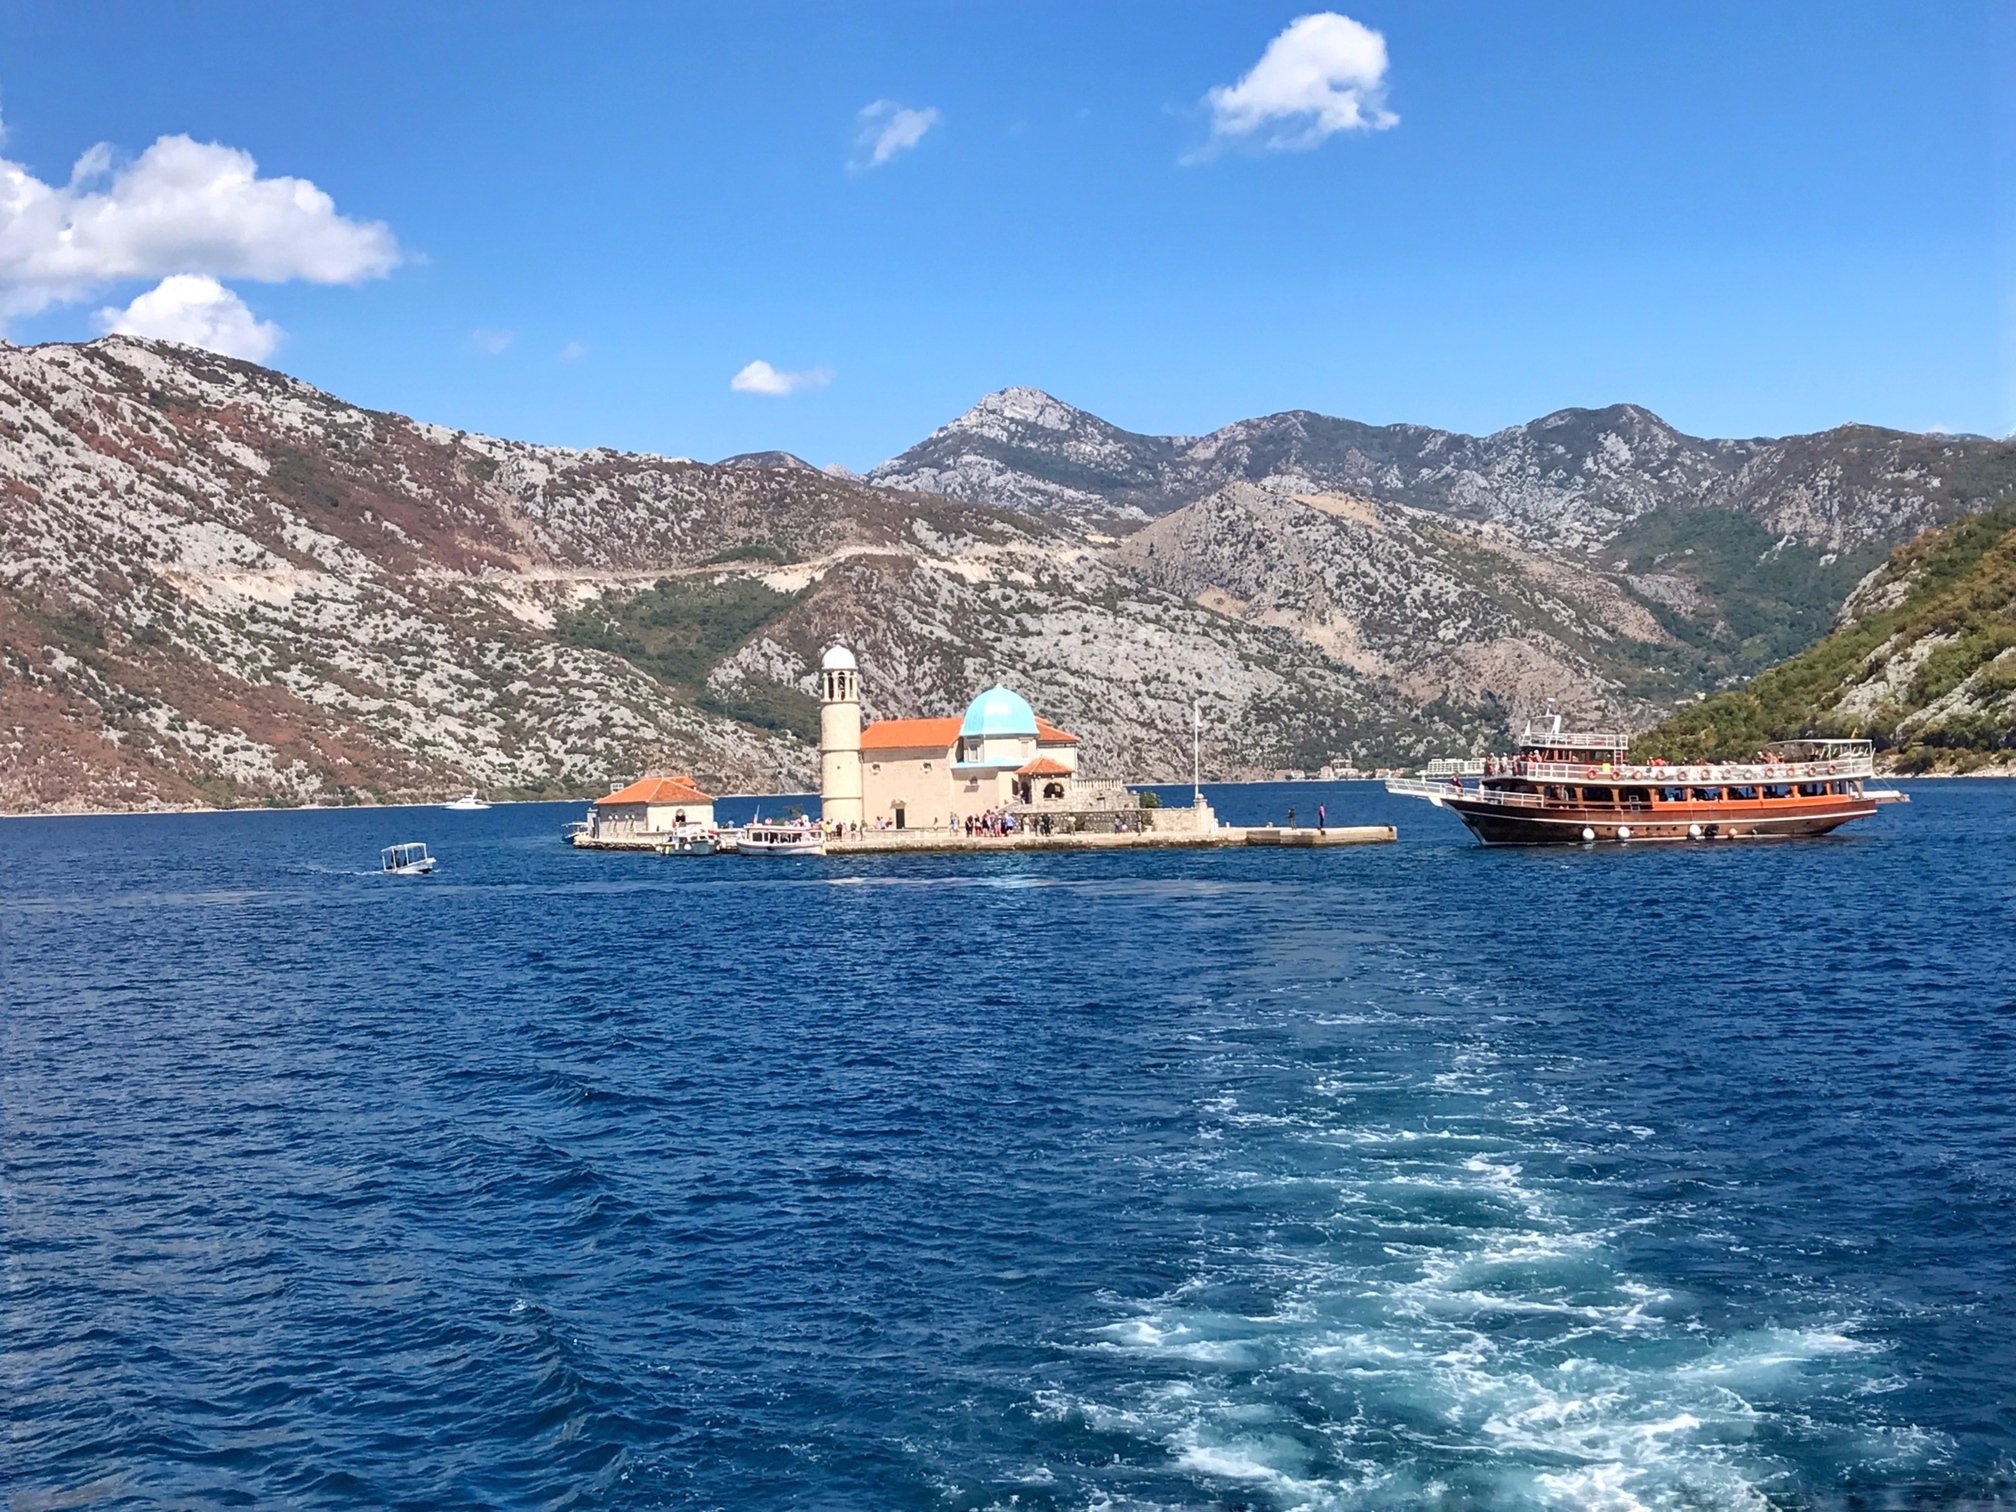 The island of Our Lady of the Rock in the Bay of Kotor, Montenegro. (Photo by Özge Şengelen)